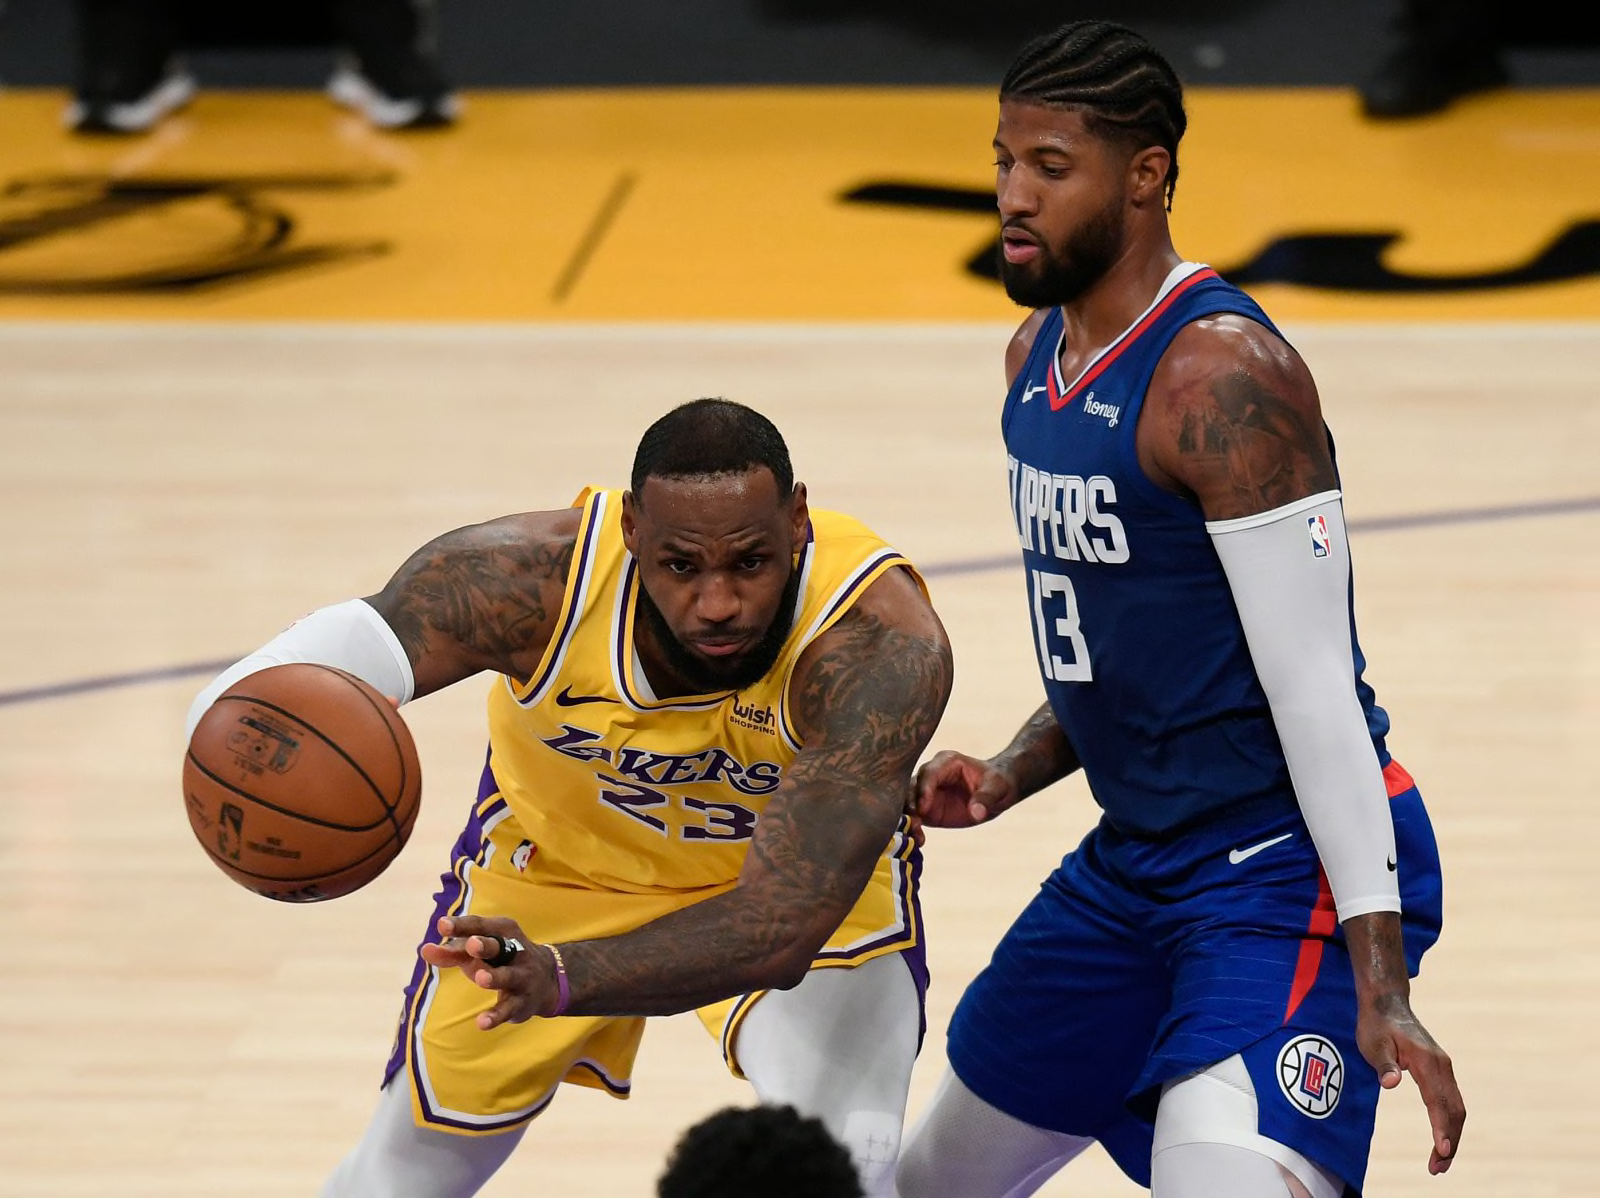 Los Angeles Lakers: 3 Statistics that show they are better than the Clippers